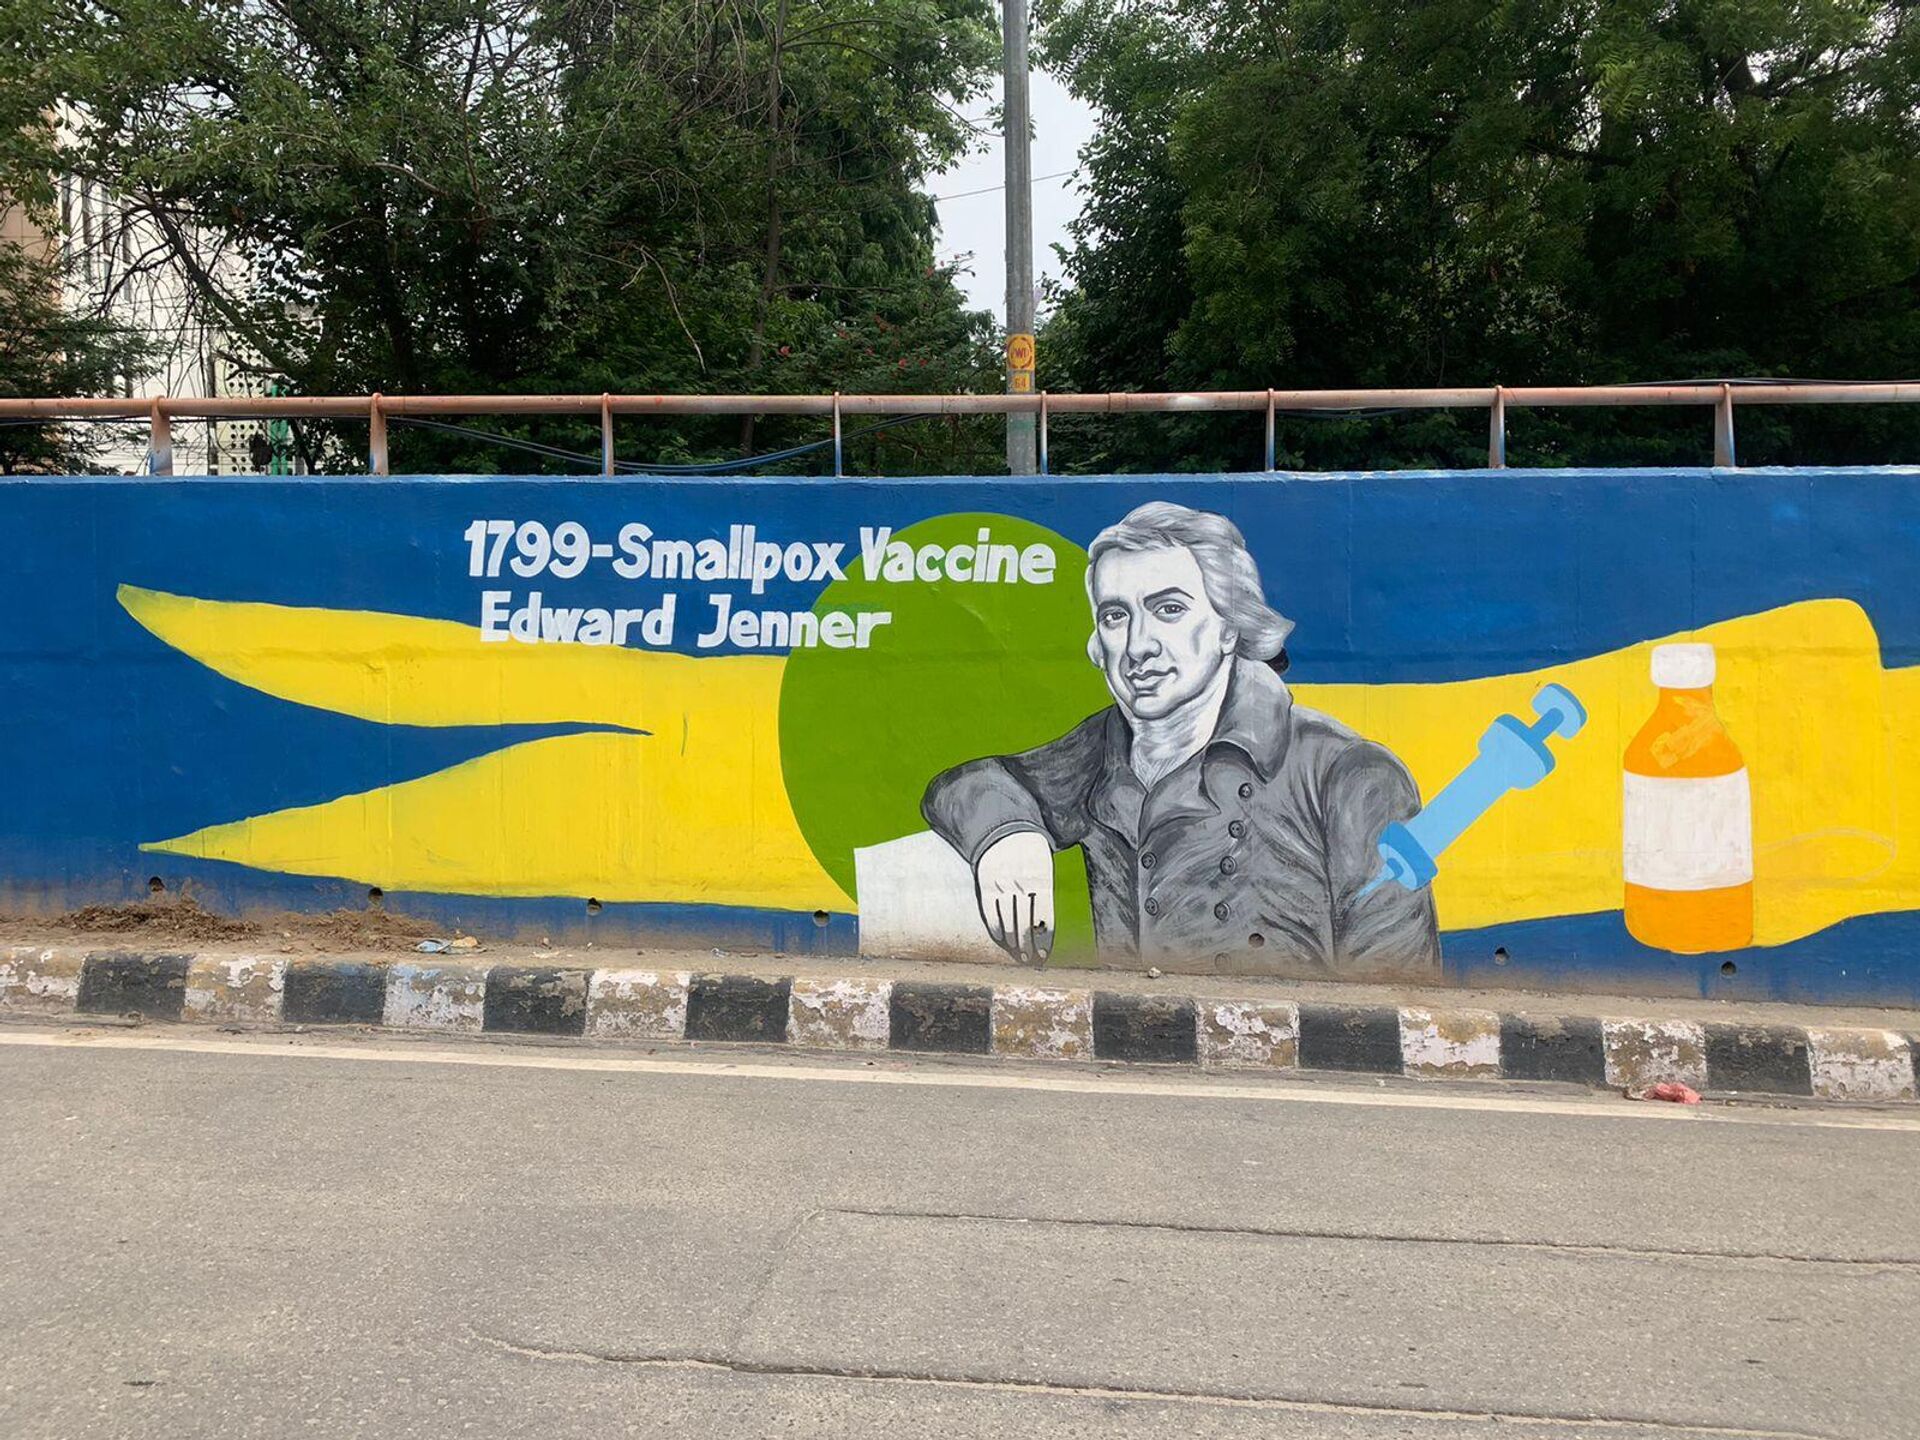 Delhi Street Art artists painted the town with creative murals on the walls of flyovers, pillars and buildings ahead of G20 Summit in New Delhi. - Sputnik India, 1920, 08.09.2023